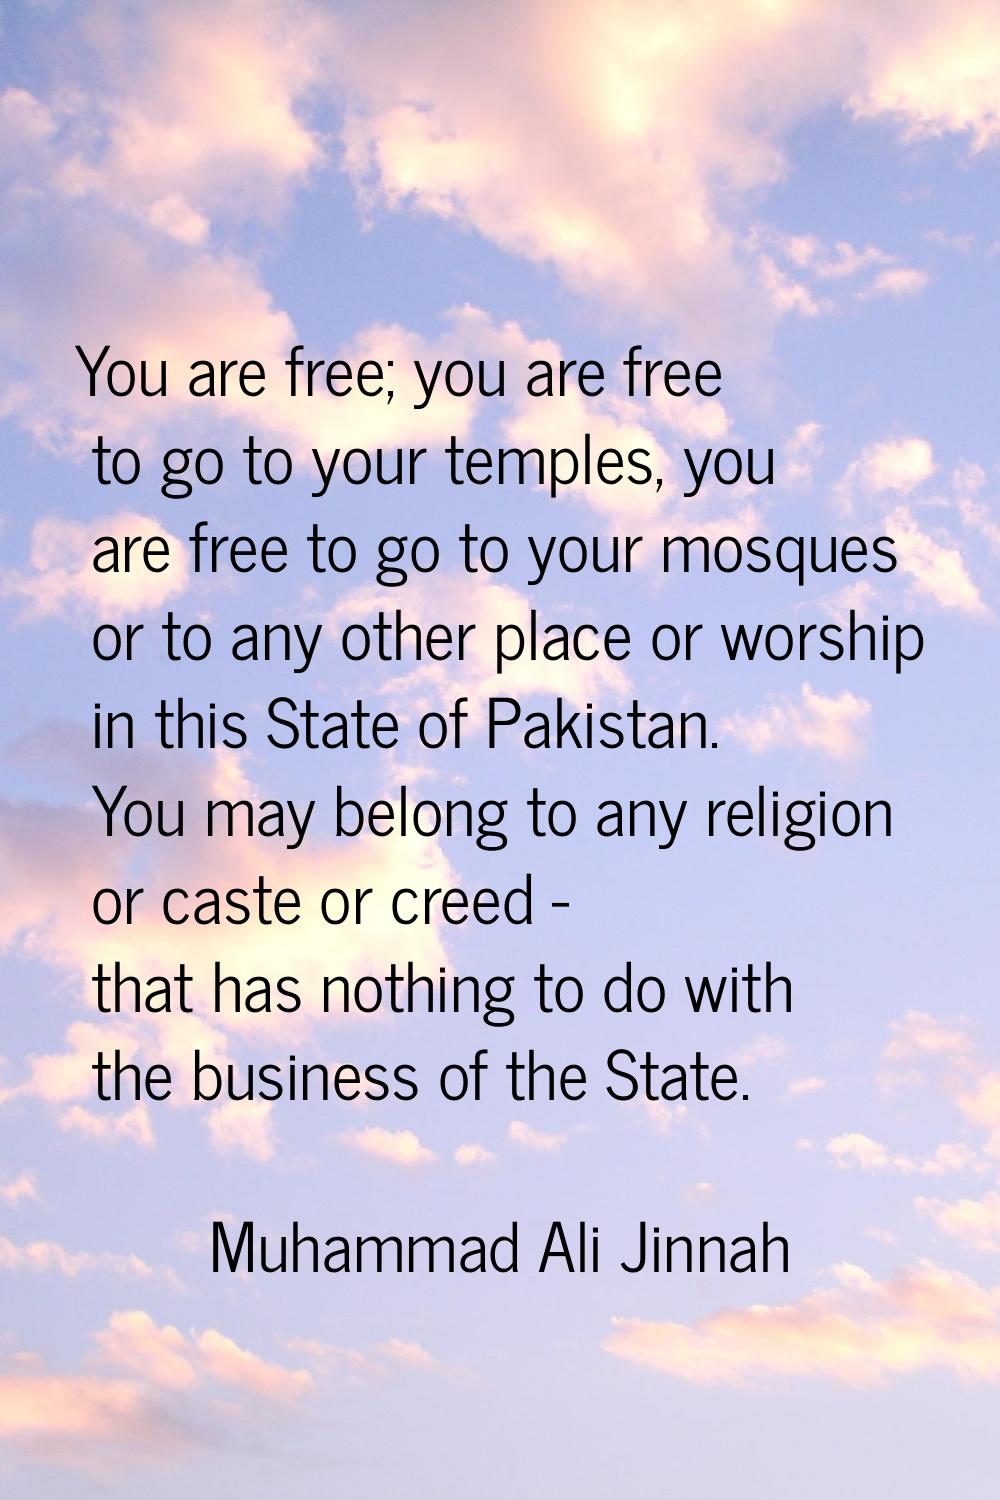 You are free; you are free to go to your temples, you are free to go to your mosques or to any othe